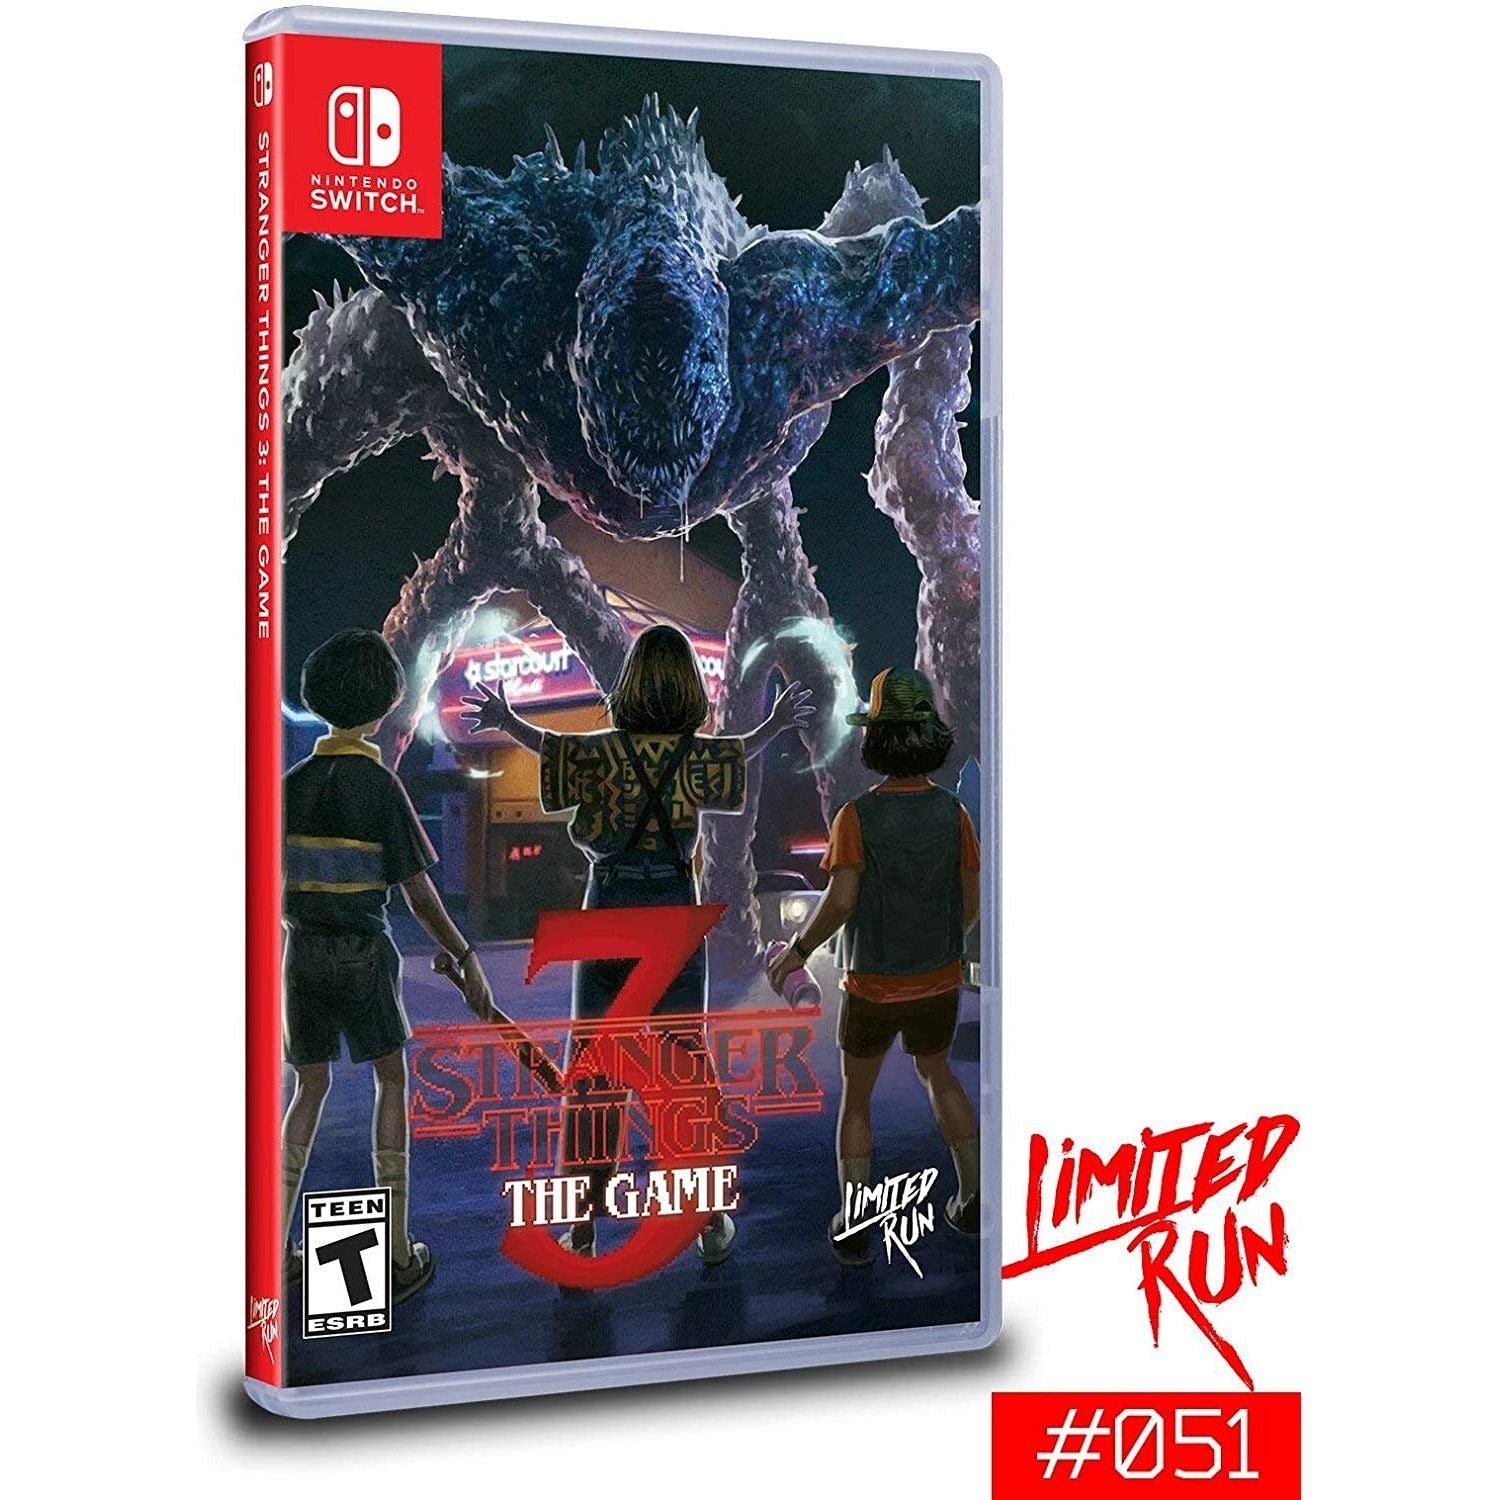 Switch - Stranger Things 3 The Game (Limited Run Game #051) (In Case)